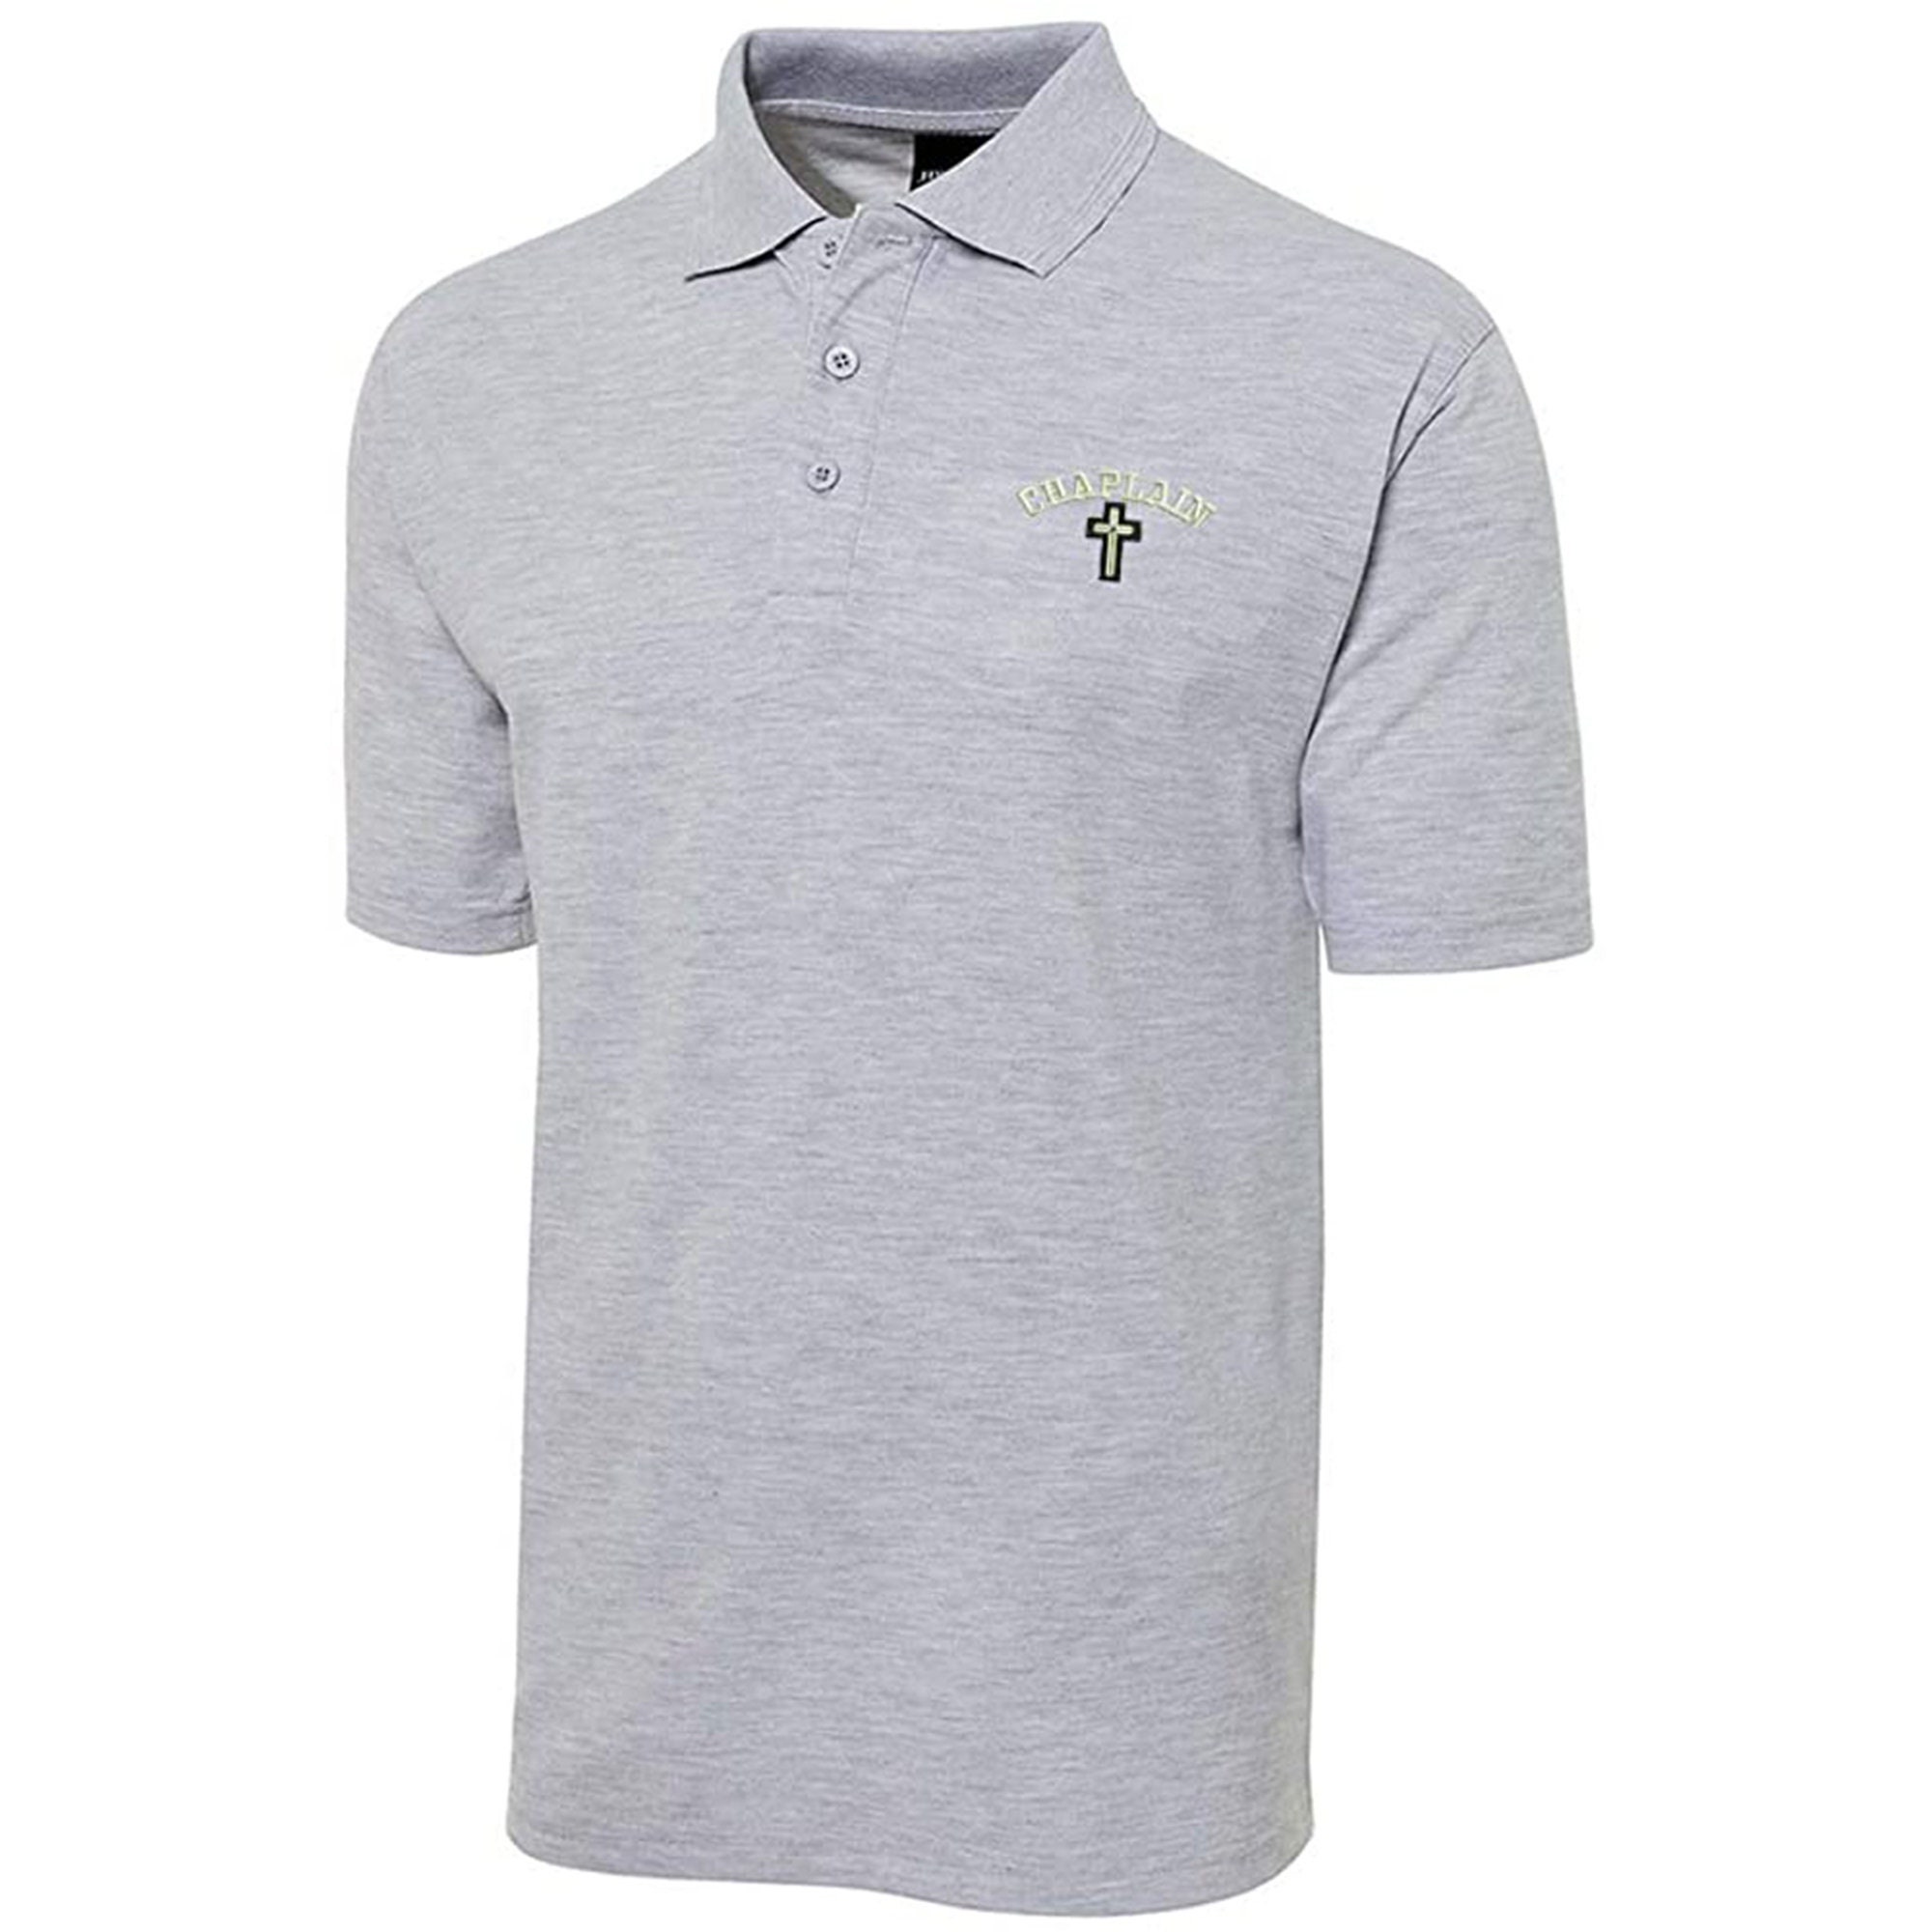 Christain Chaplain Cross Embroidered Short Sleeve Polo Shirts Classic Embroidery Men's Polo Shirt